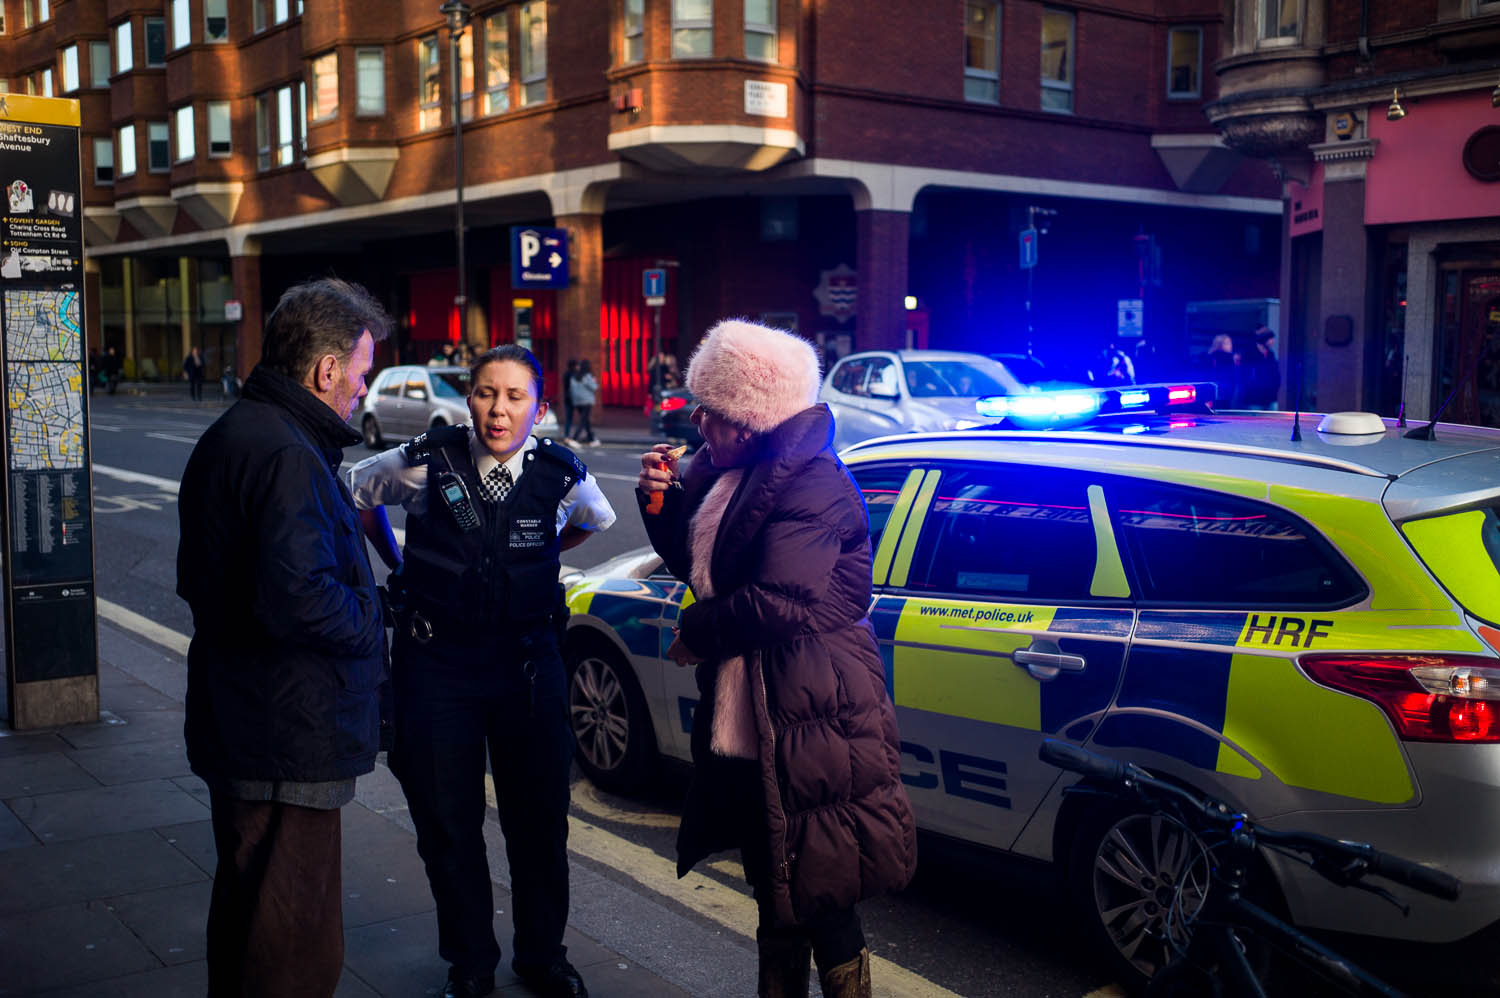 A London police officer chatting with a woman eating orange slices in a furry hat